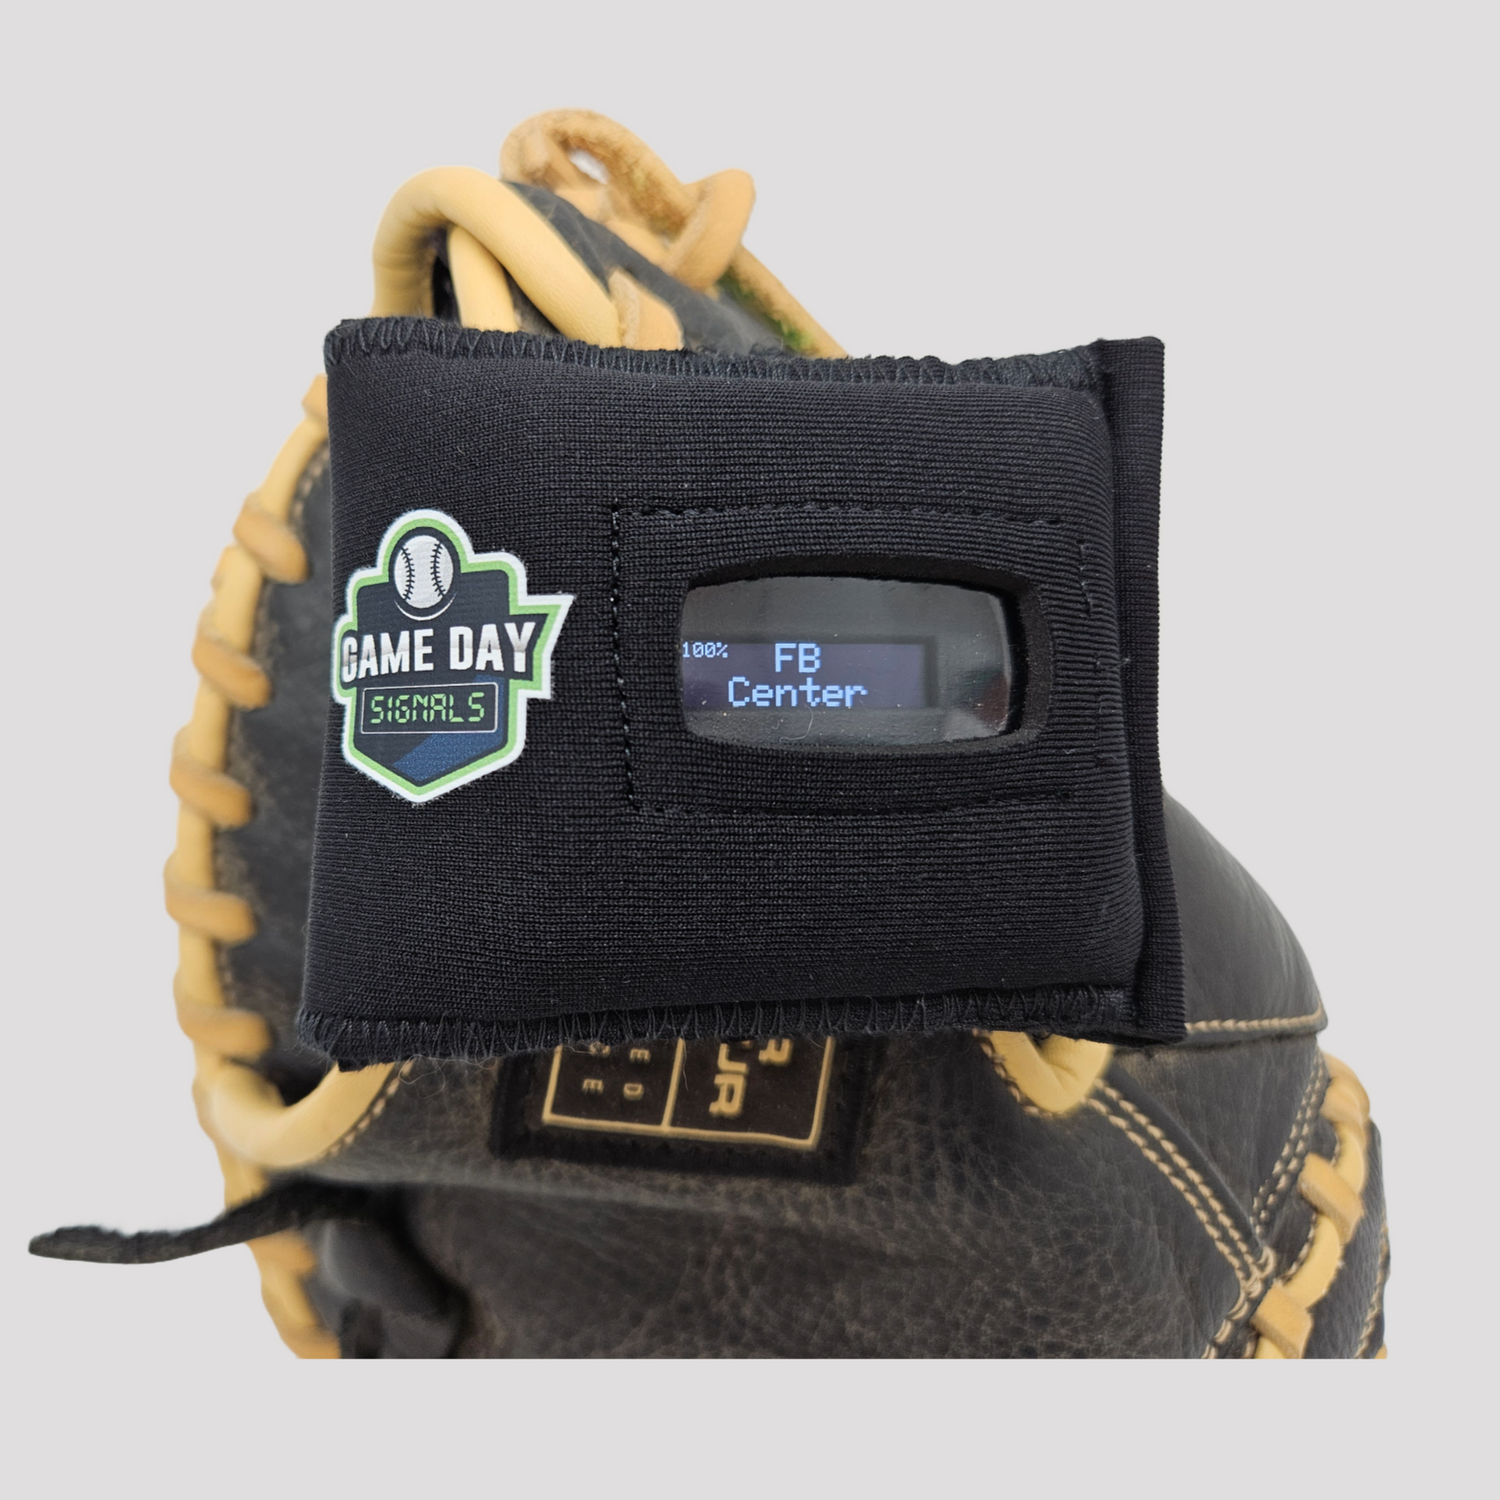 Vanderbilt used an electronic wristband system for calling pitches